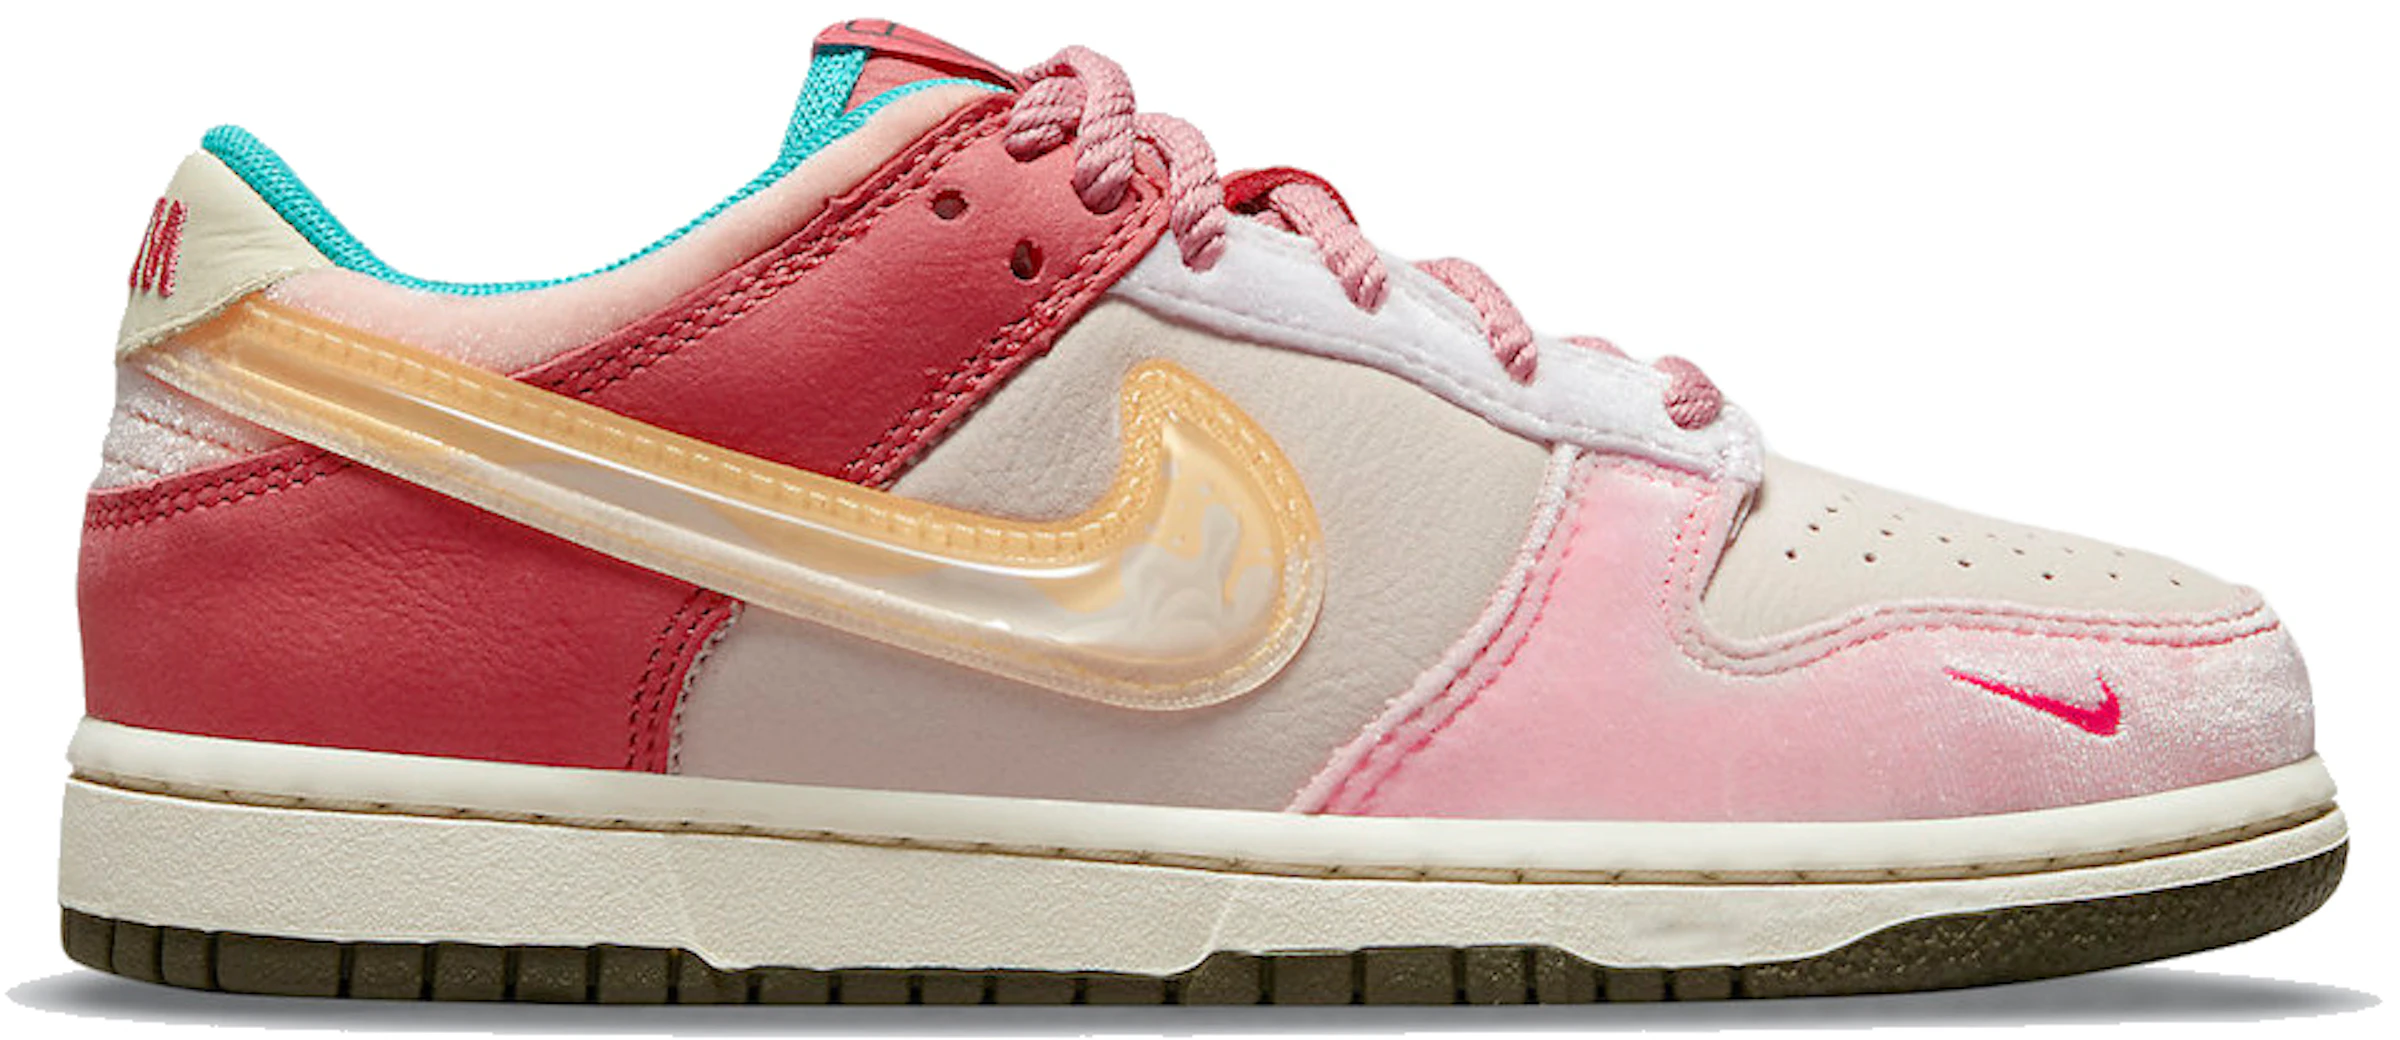 Nike Dunk Low Social Status Free Lunch Strawberry Milk (PS) - DM3349-600 -  US